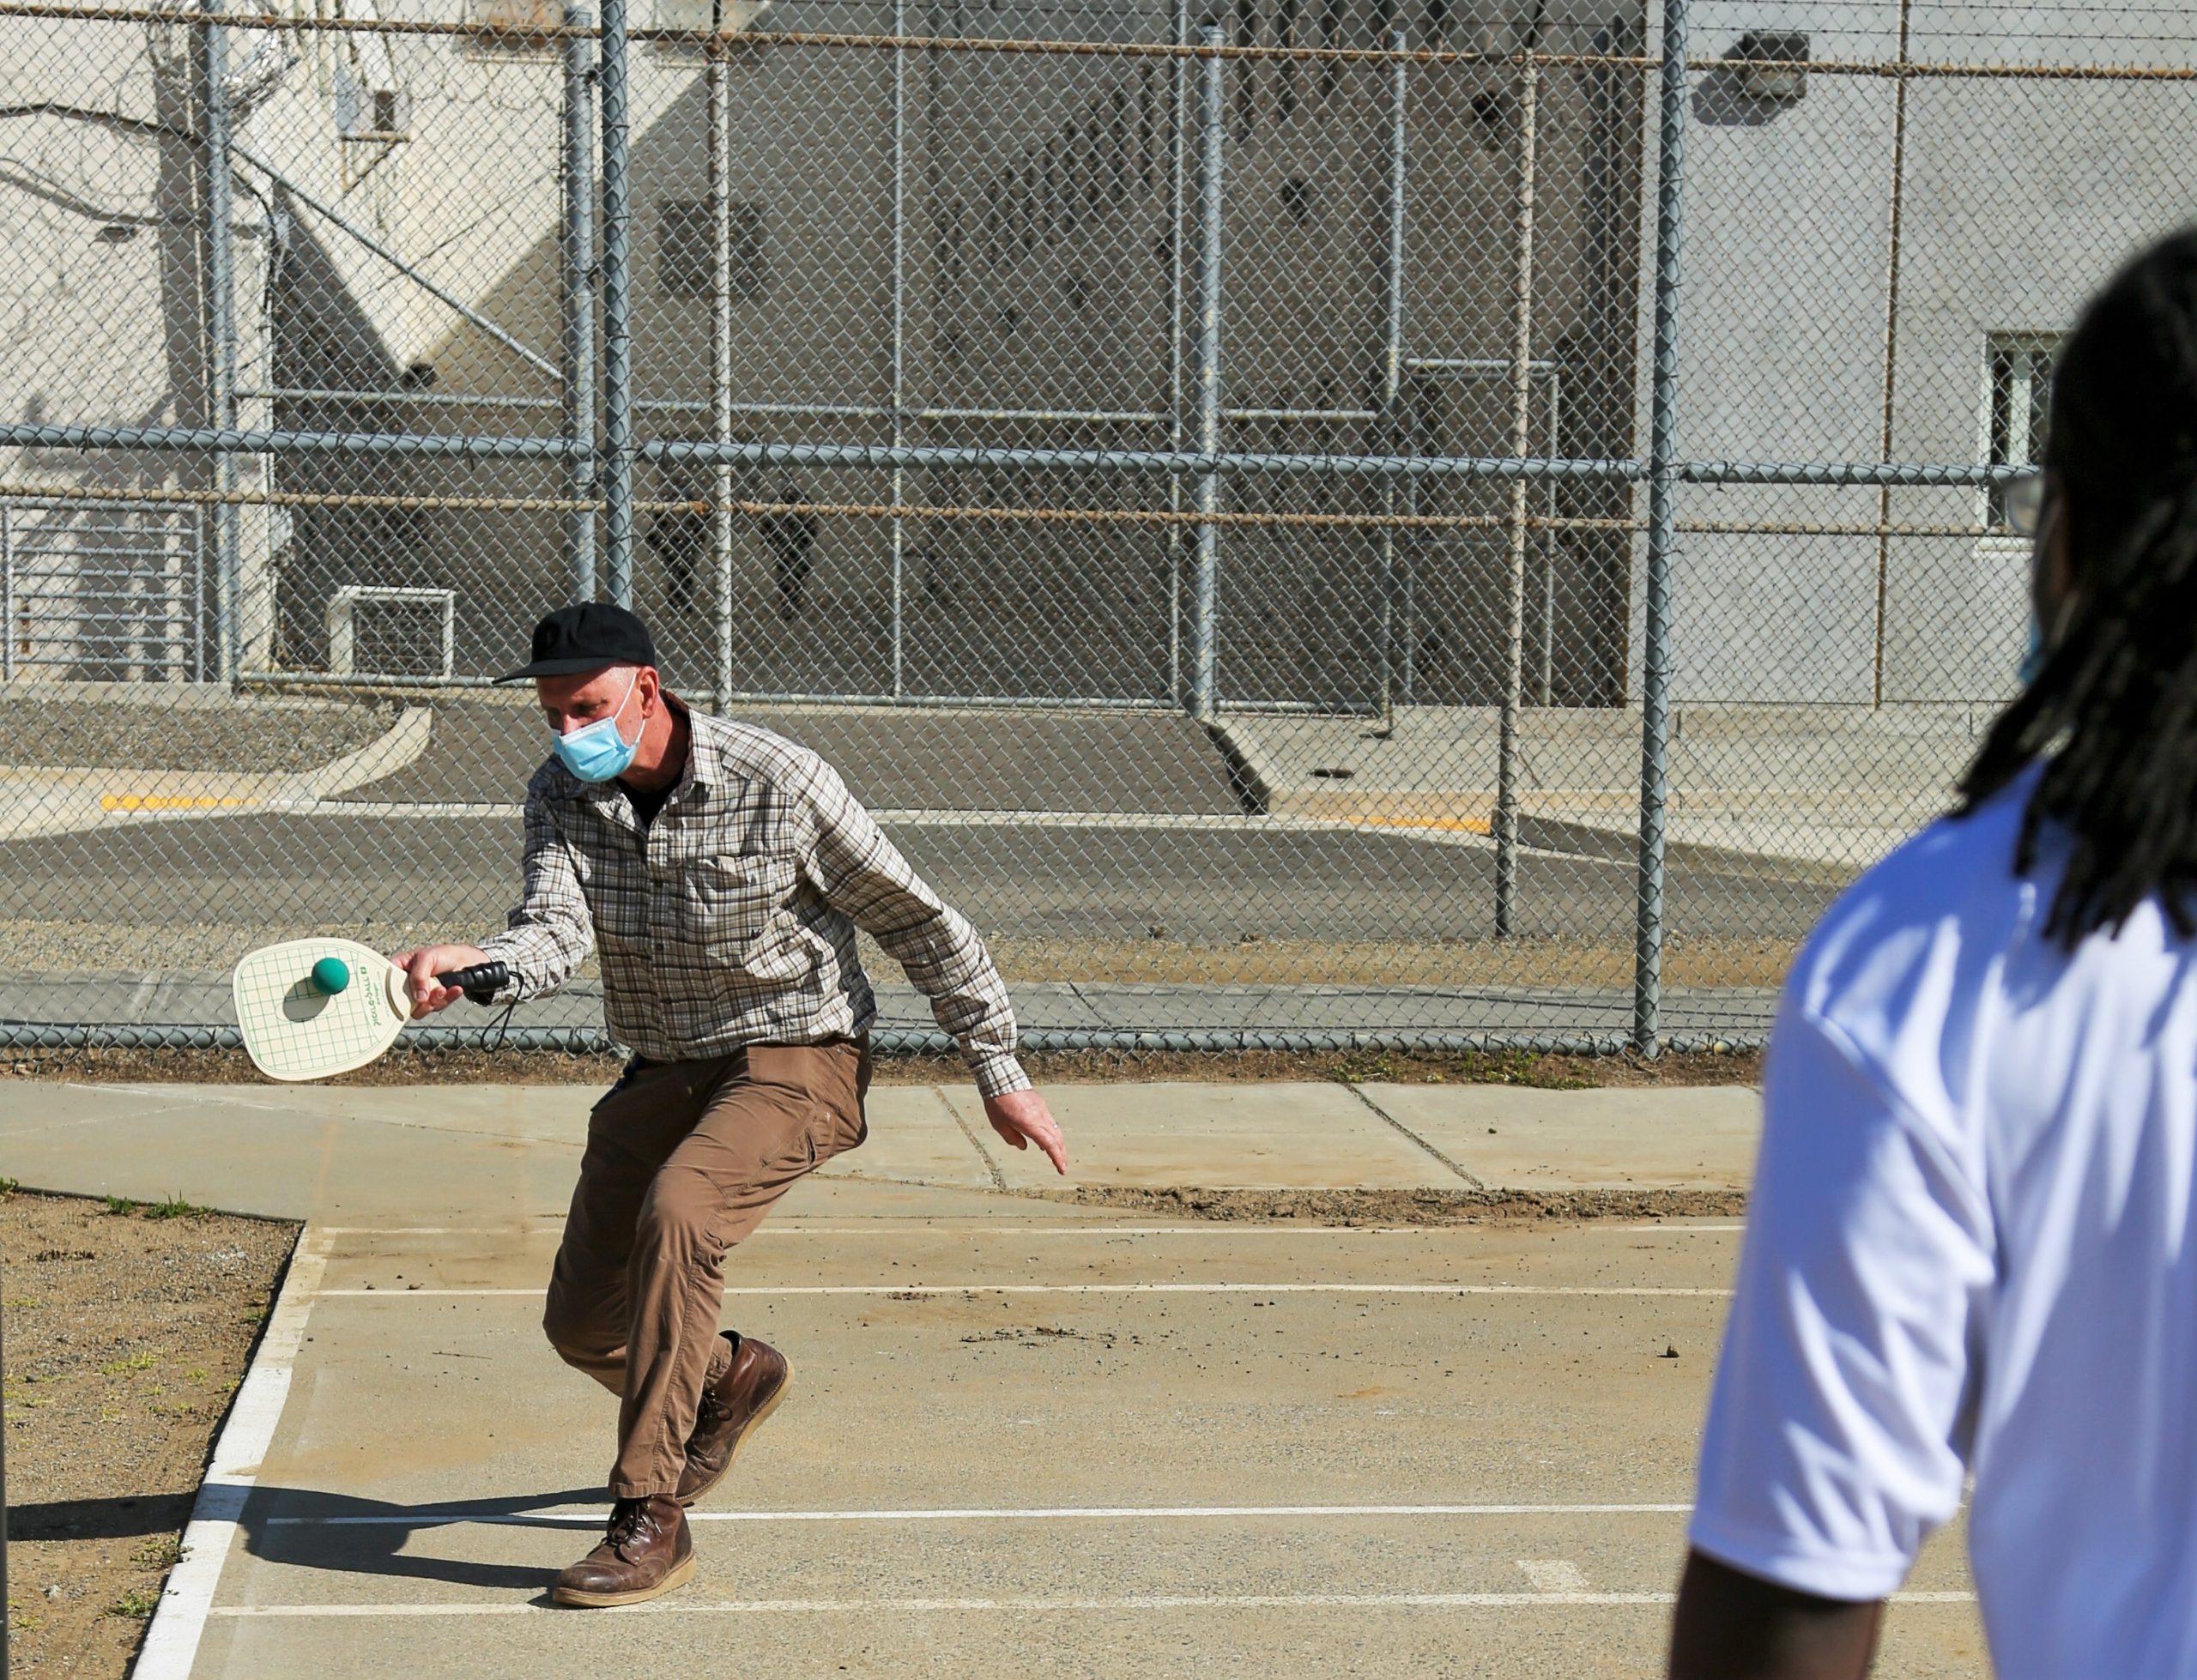 A recreation supervisor plays tennis at CMF, fencing and prison buildings can be seen in the background.